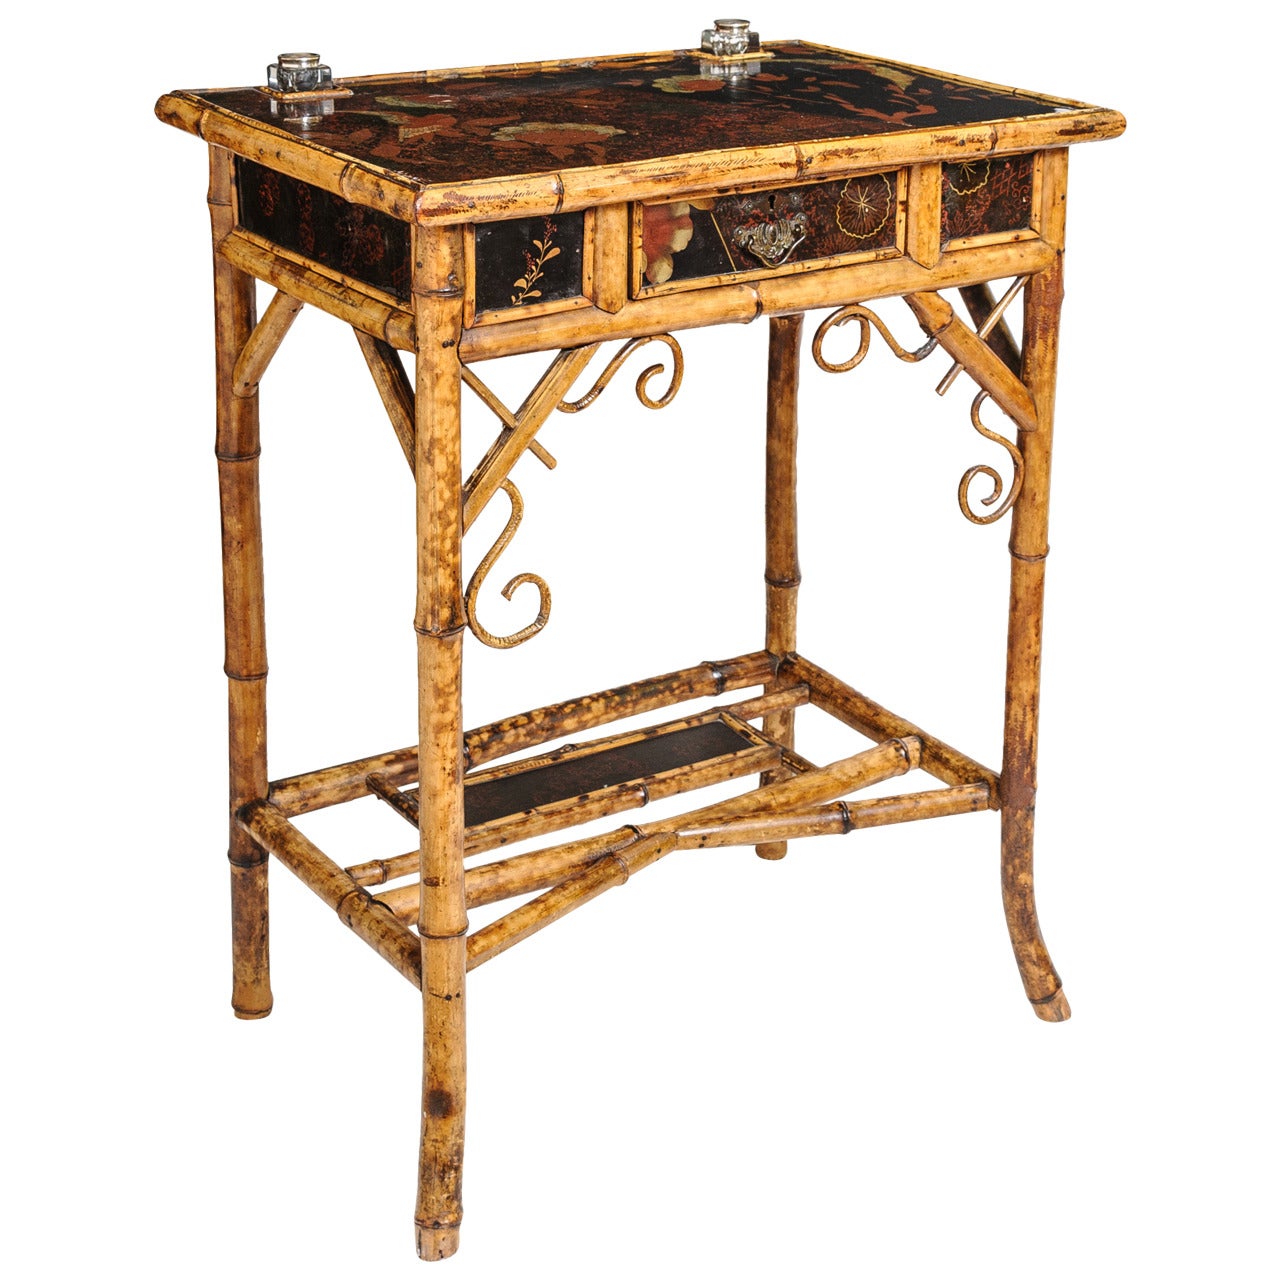 19th Century English Bamboo Desk with Inkwells